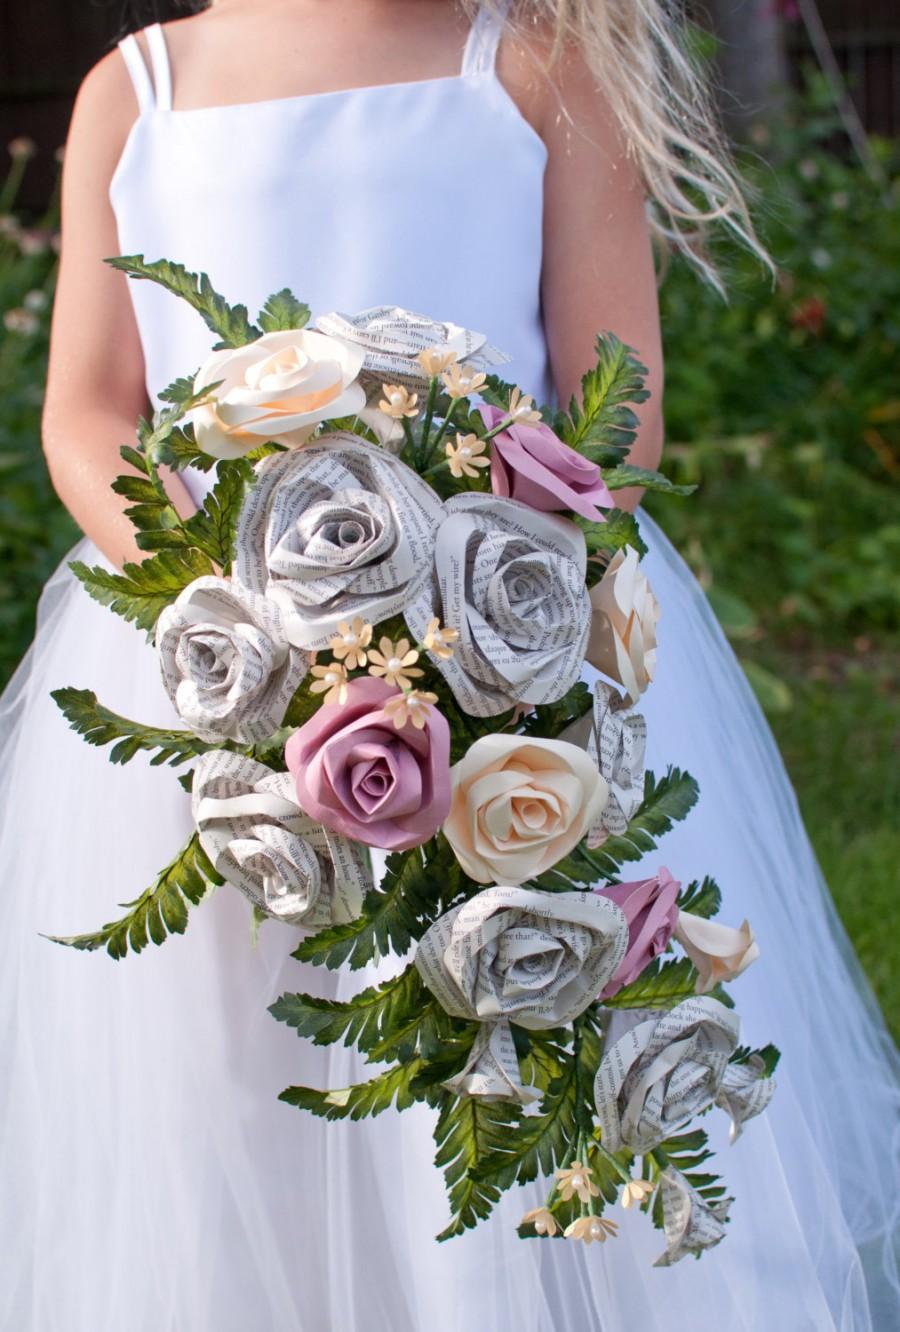 Wedding - Great Gatsby Book Page and Paper Bridal Cascade Bouquet with Silk Greenery